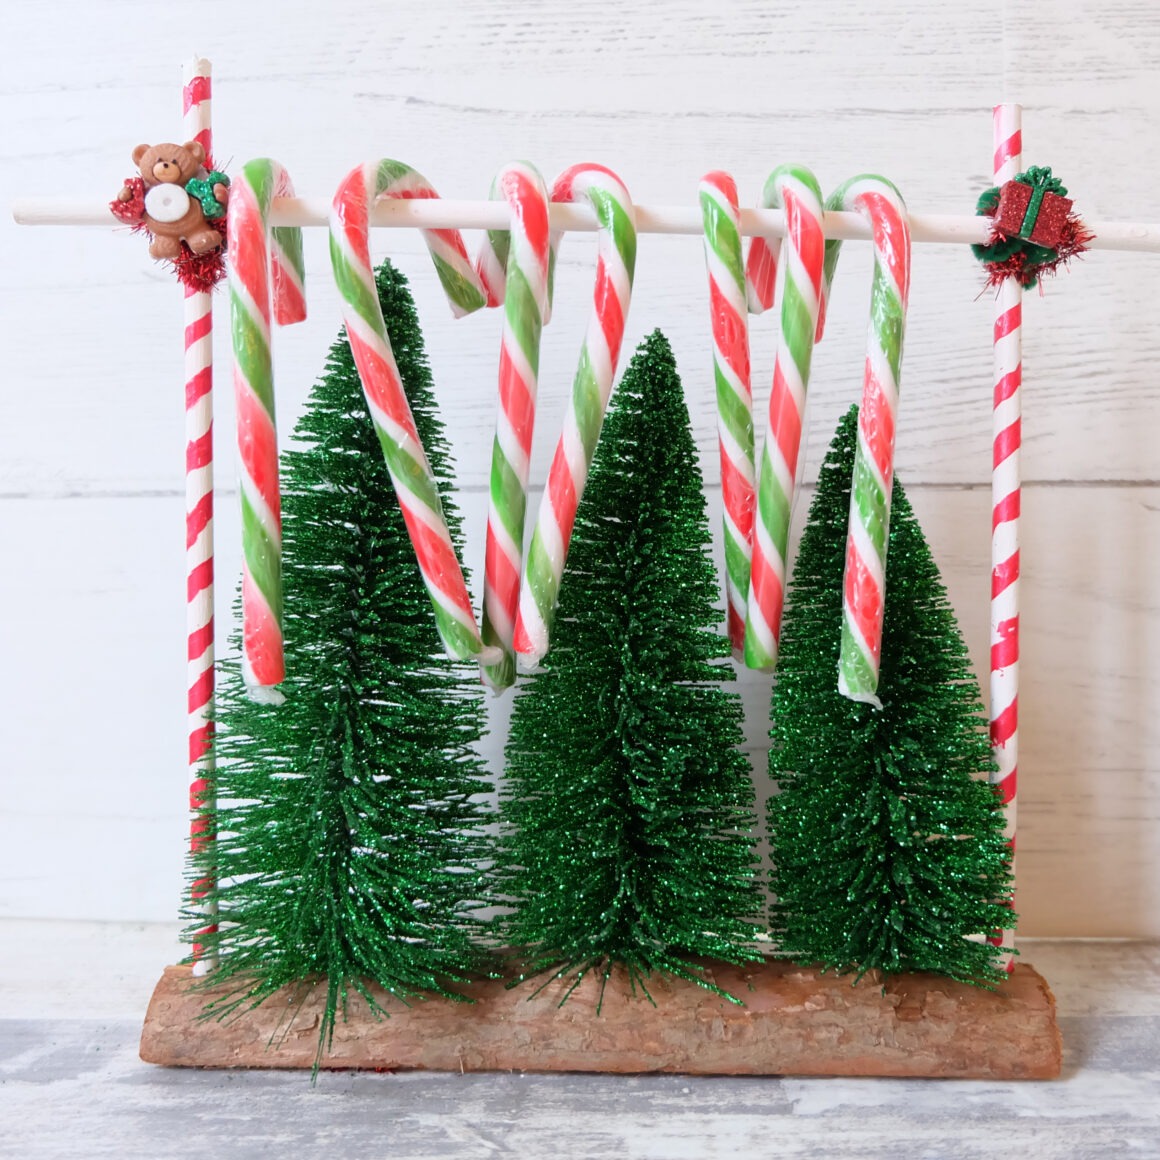 DIY Candy Cane Holder by Champagne and Sugarplums